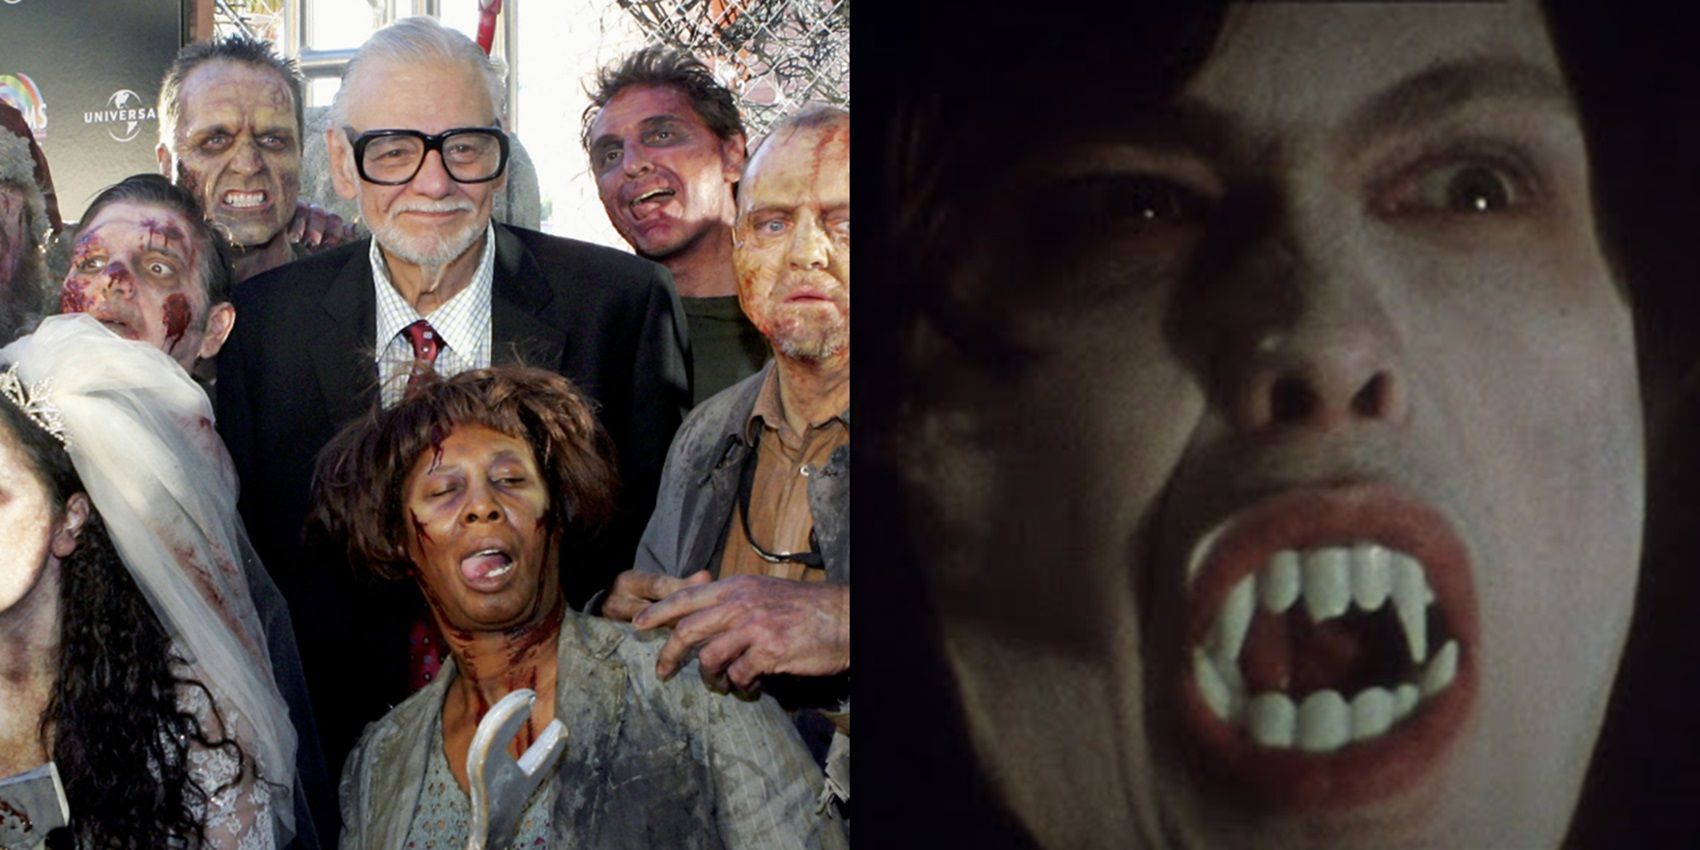 George A Romero with zombie cosplayers and Martin with fangs in his movie Martin